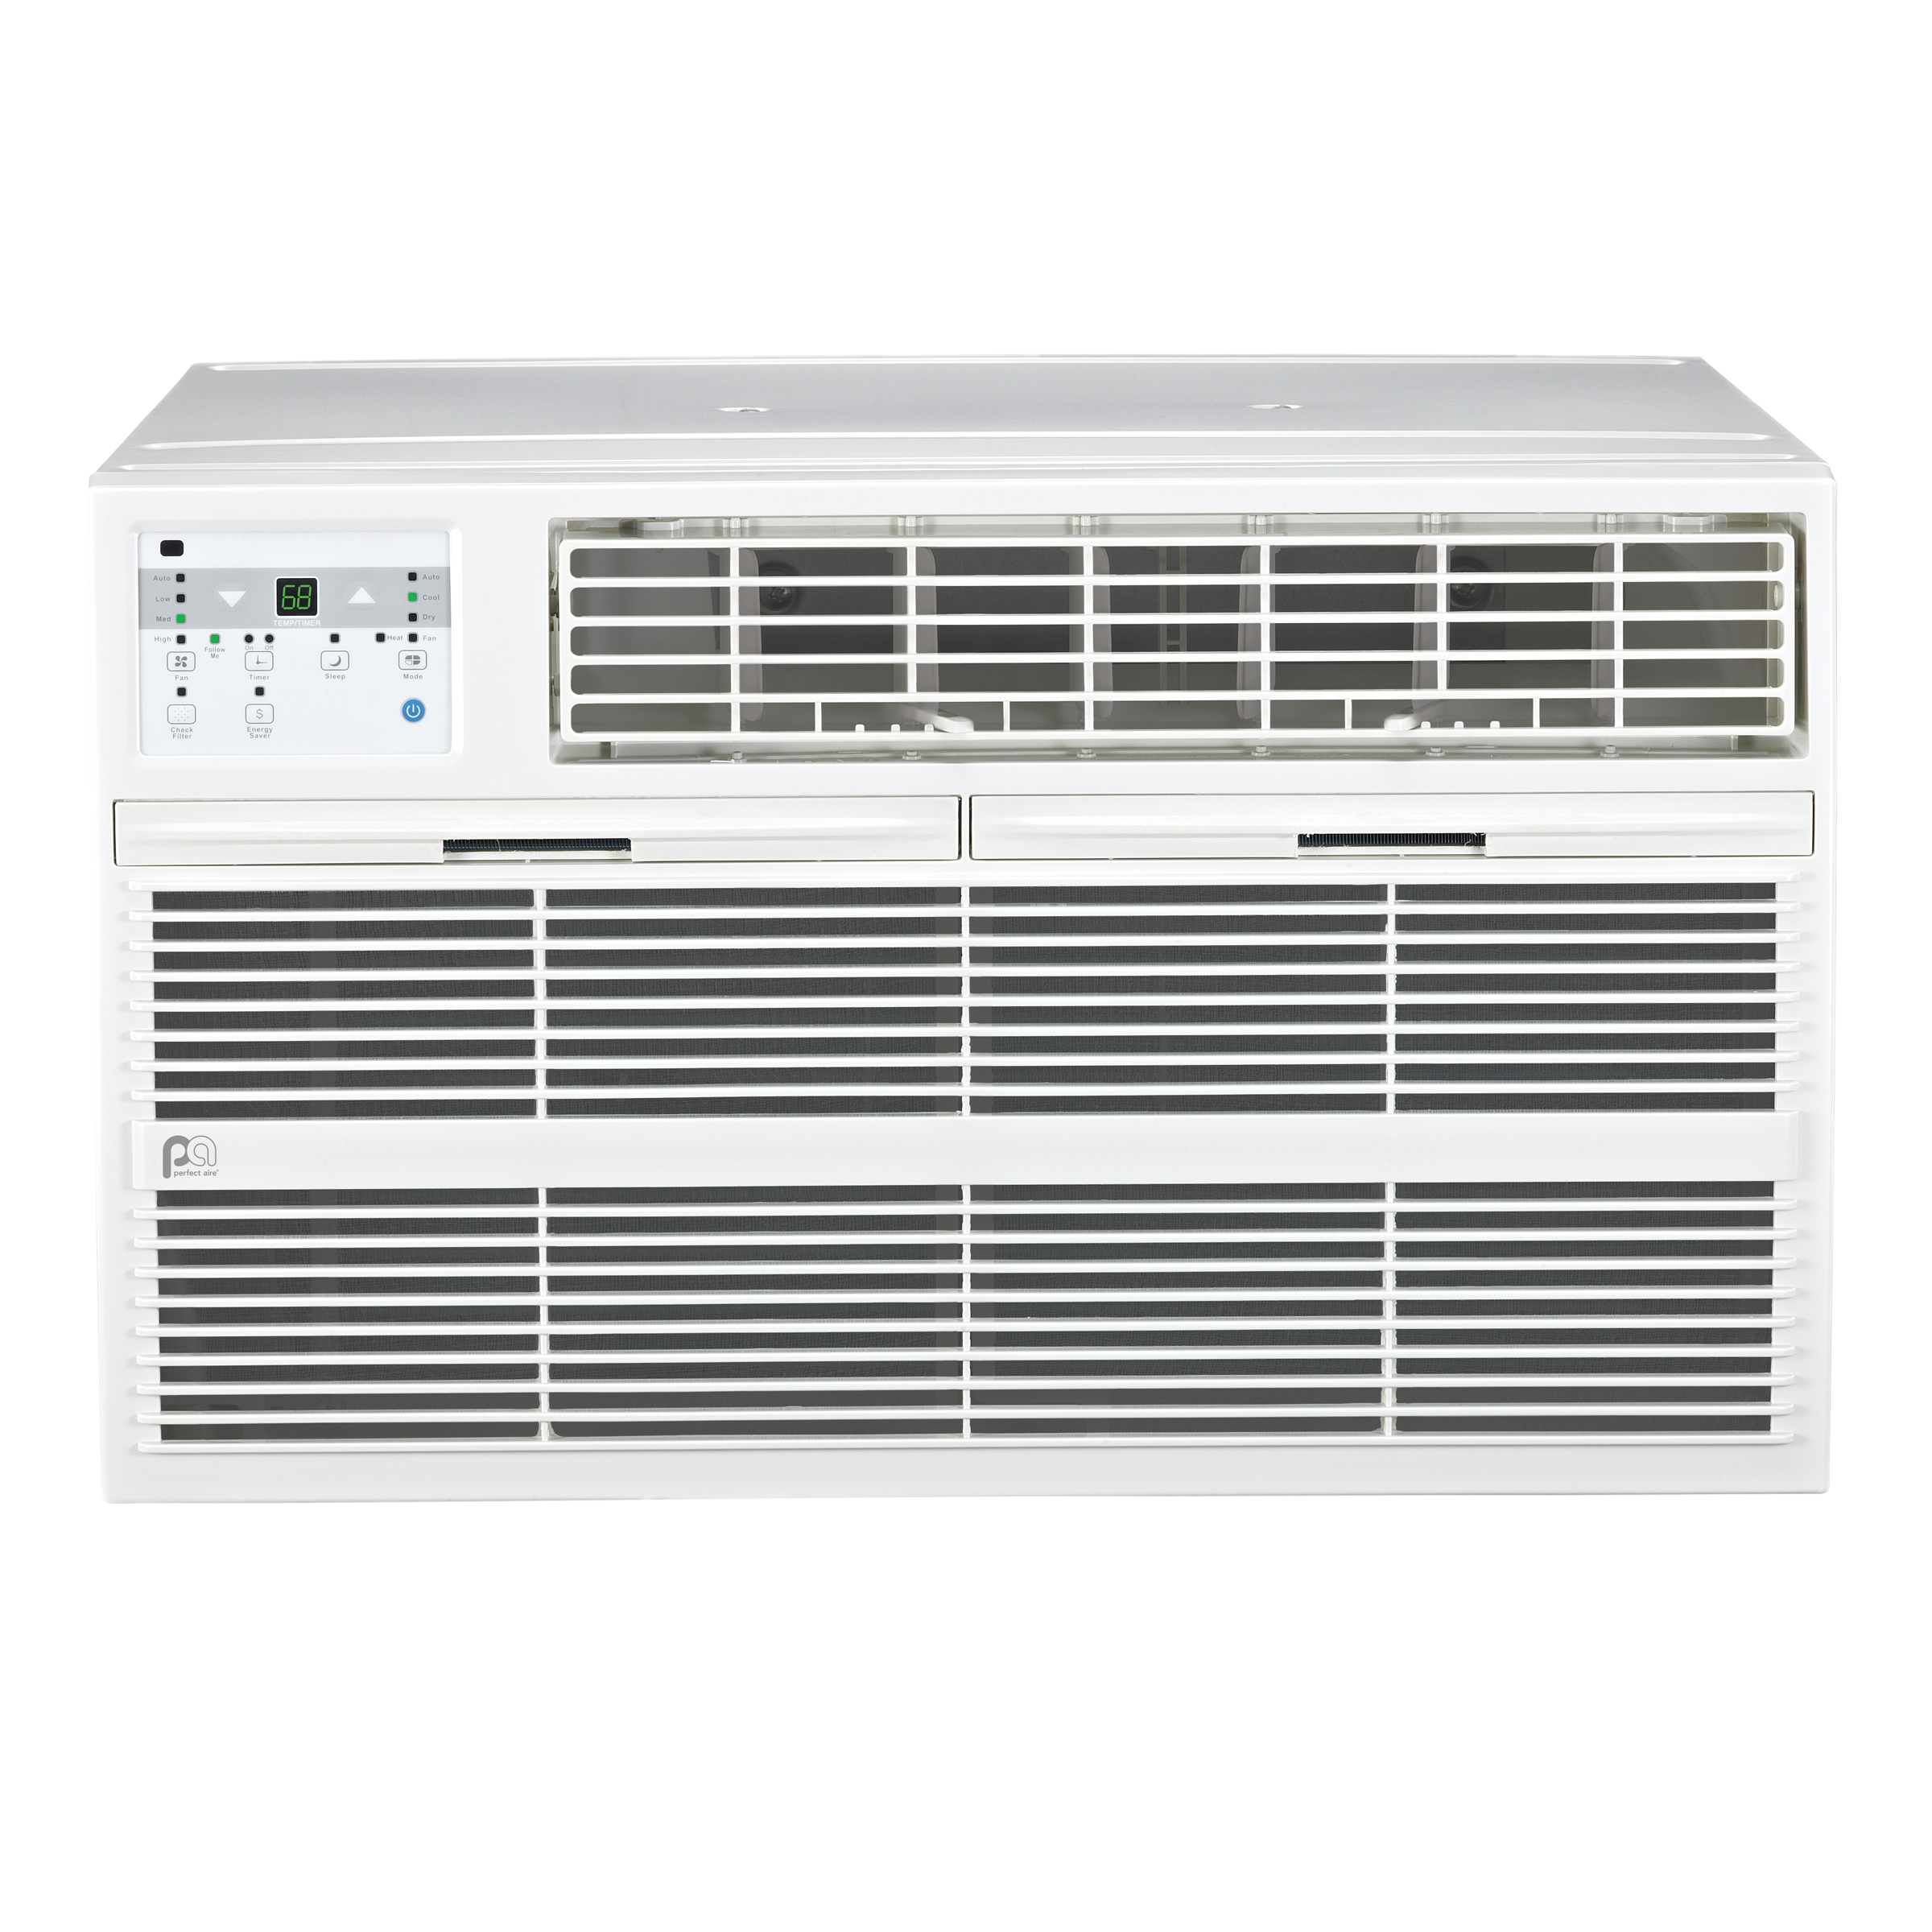 3PATW14002 Perfect Aire 14,000 BTU Thru-the-Wall Air Conditioner, Sq. ft: 550-700 Coverage, With Remote Control